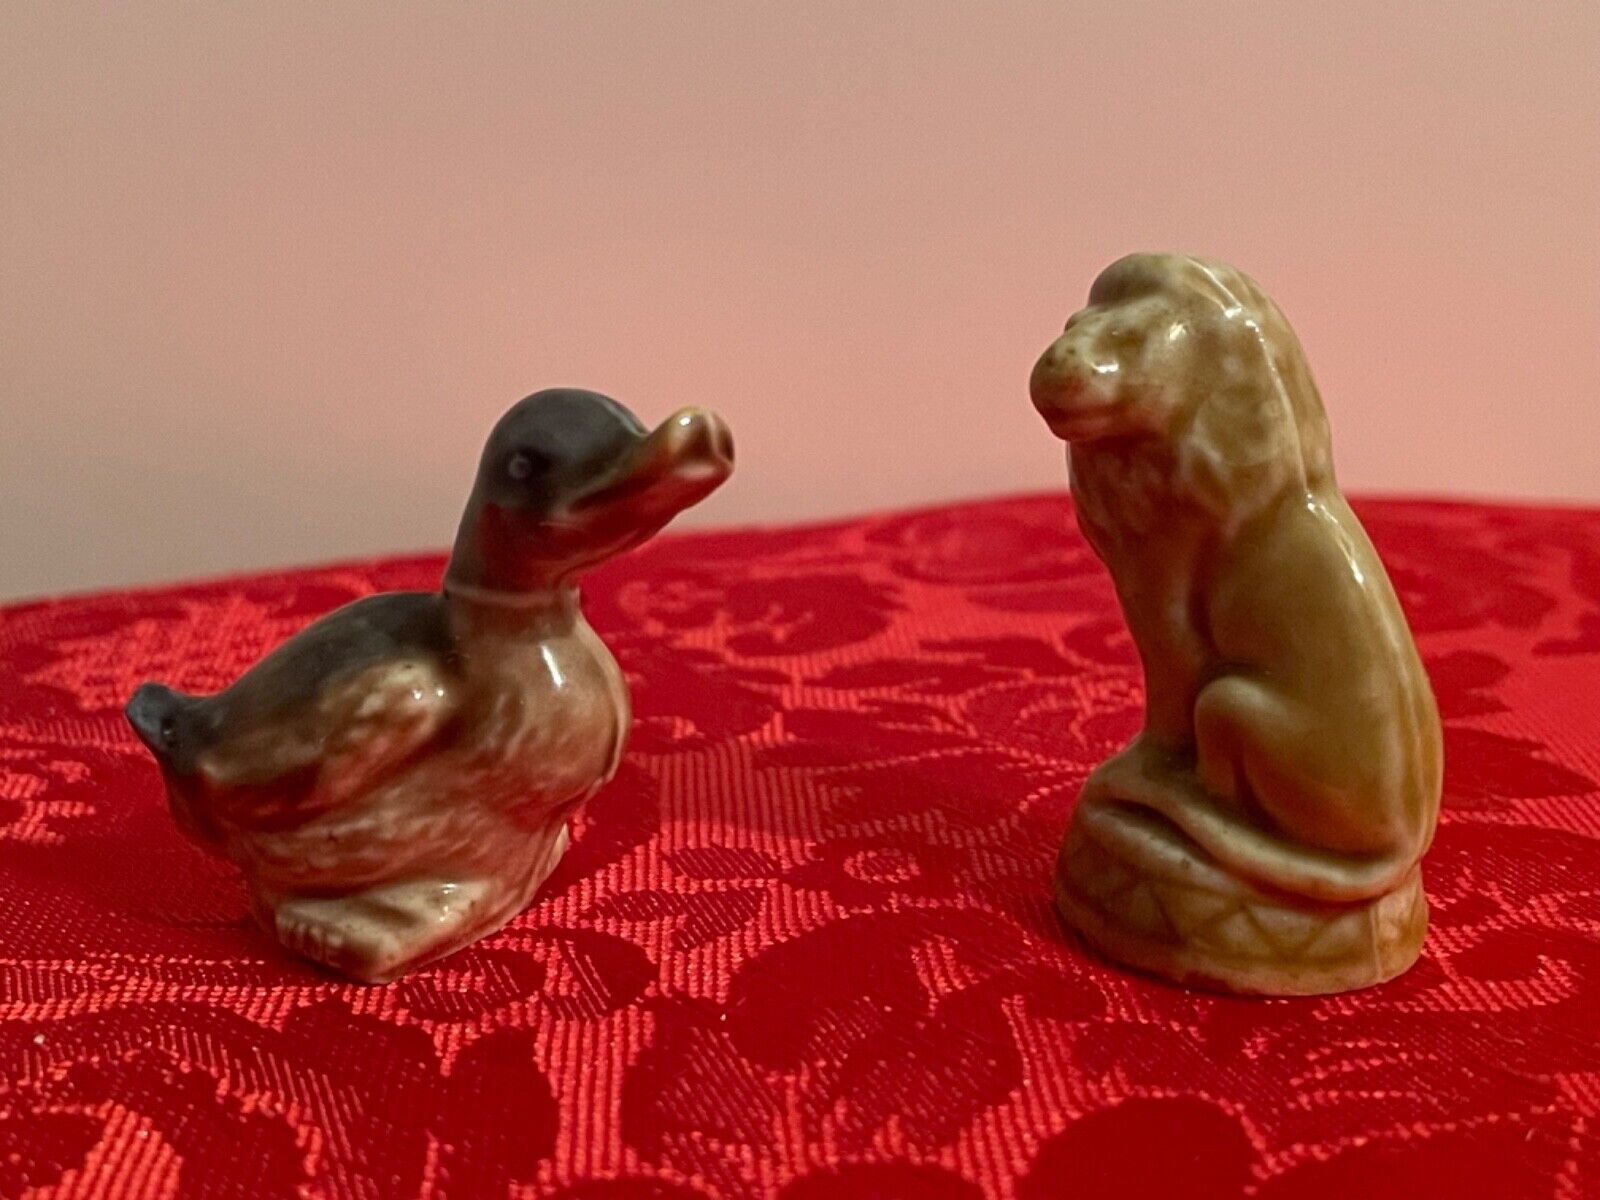 Figurines Small Duck and Lion Polished Porcelain carved figurines